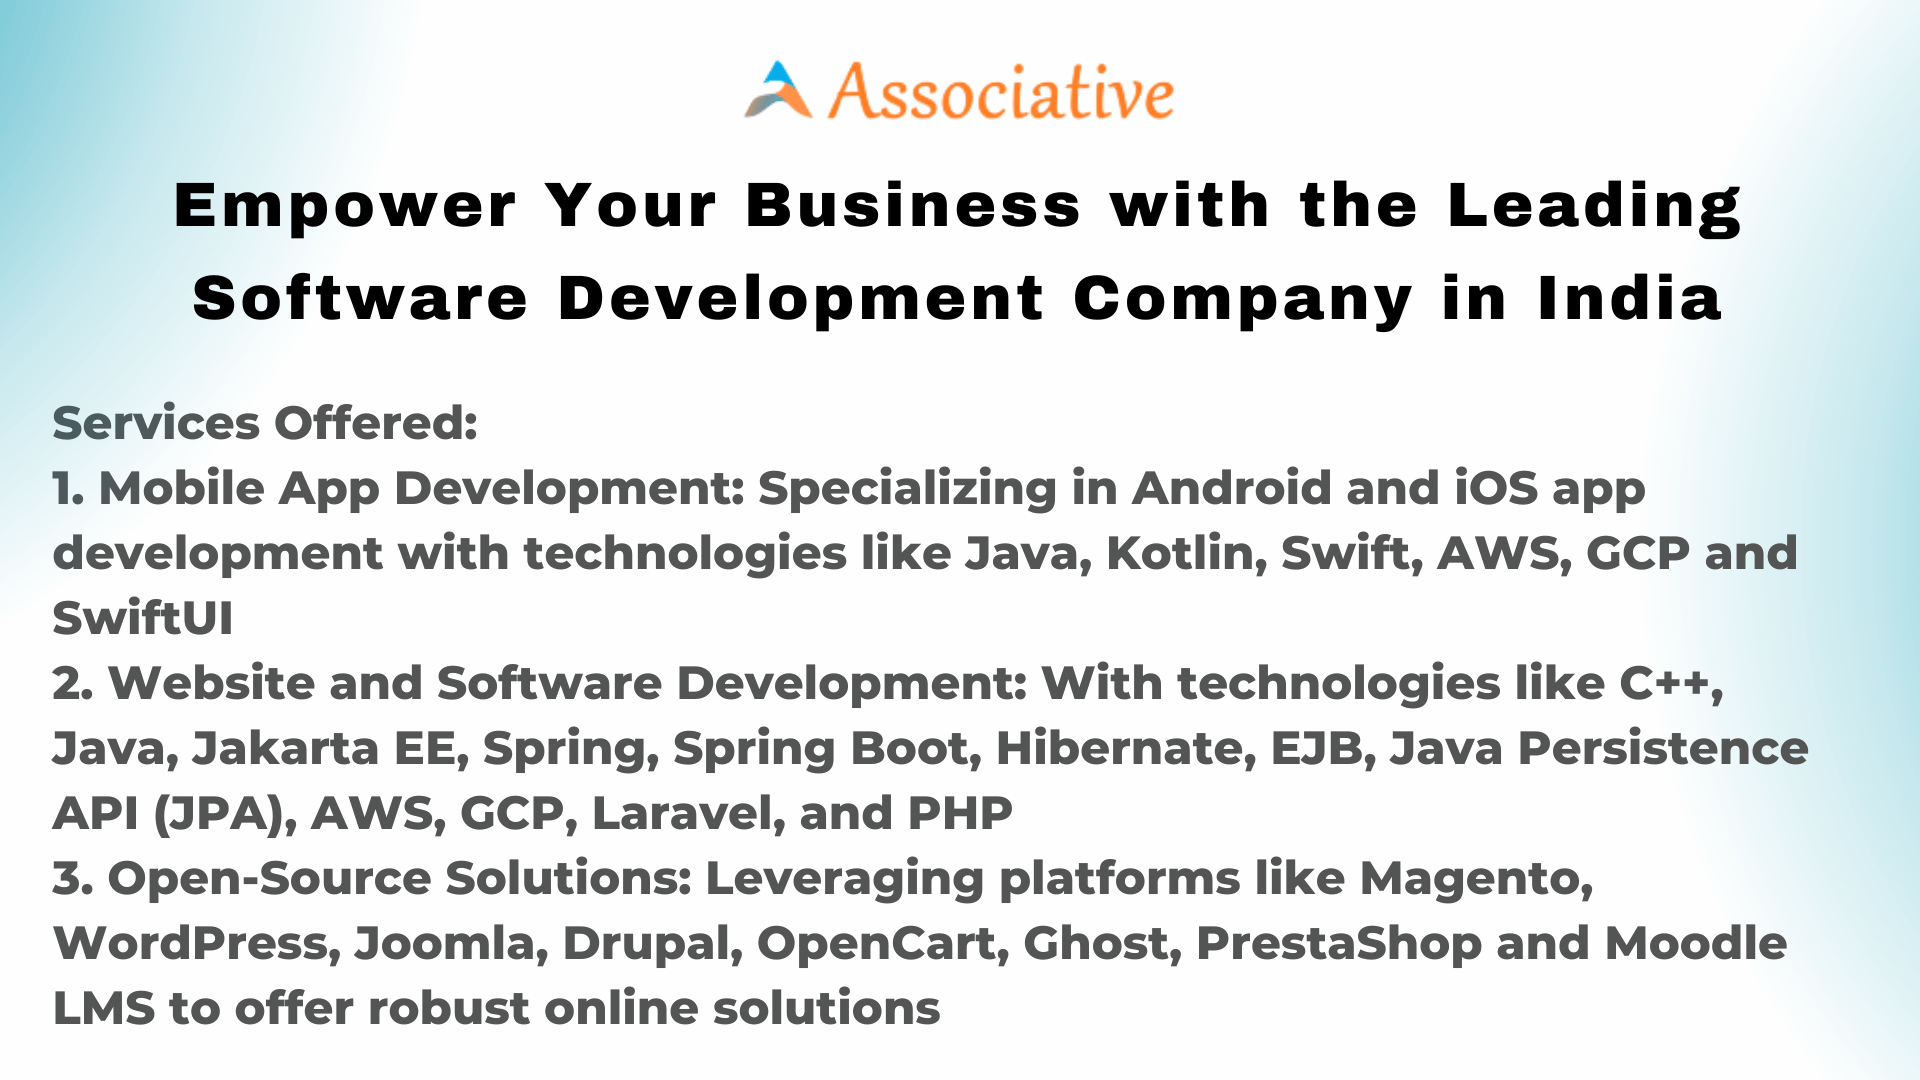 Empower Your Business with the Leading Software Development Company in India